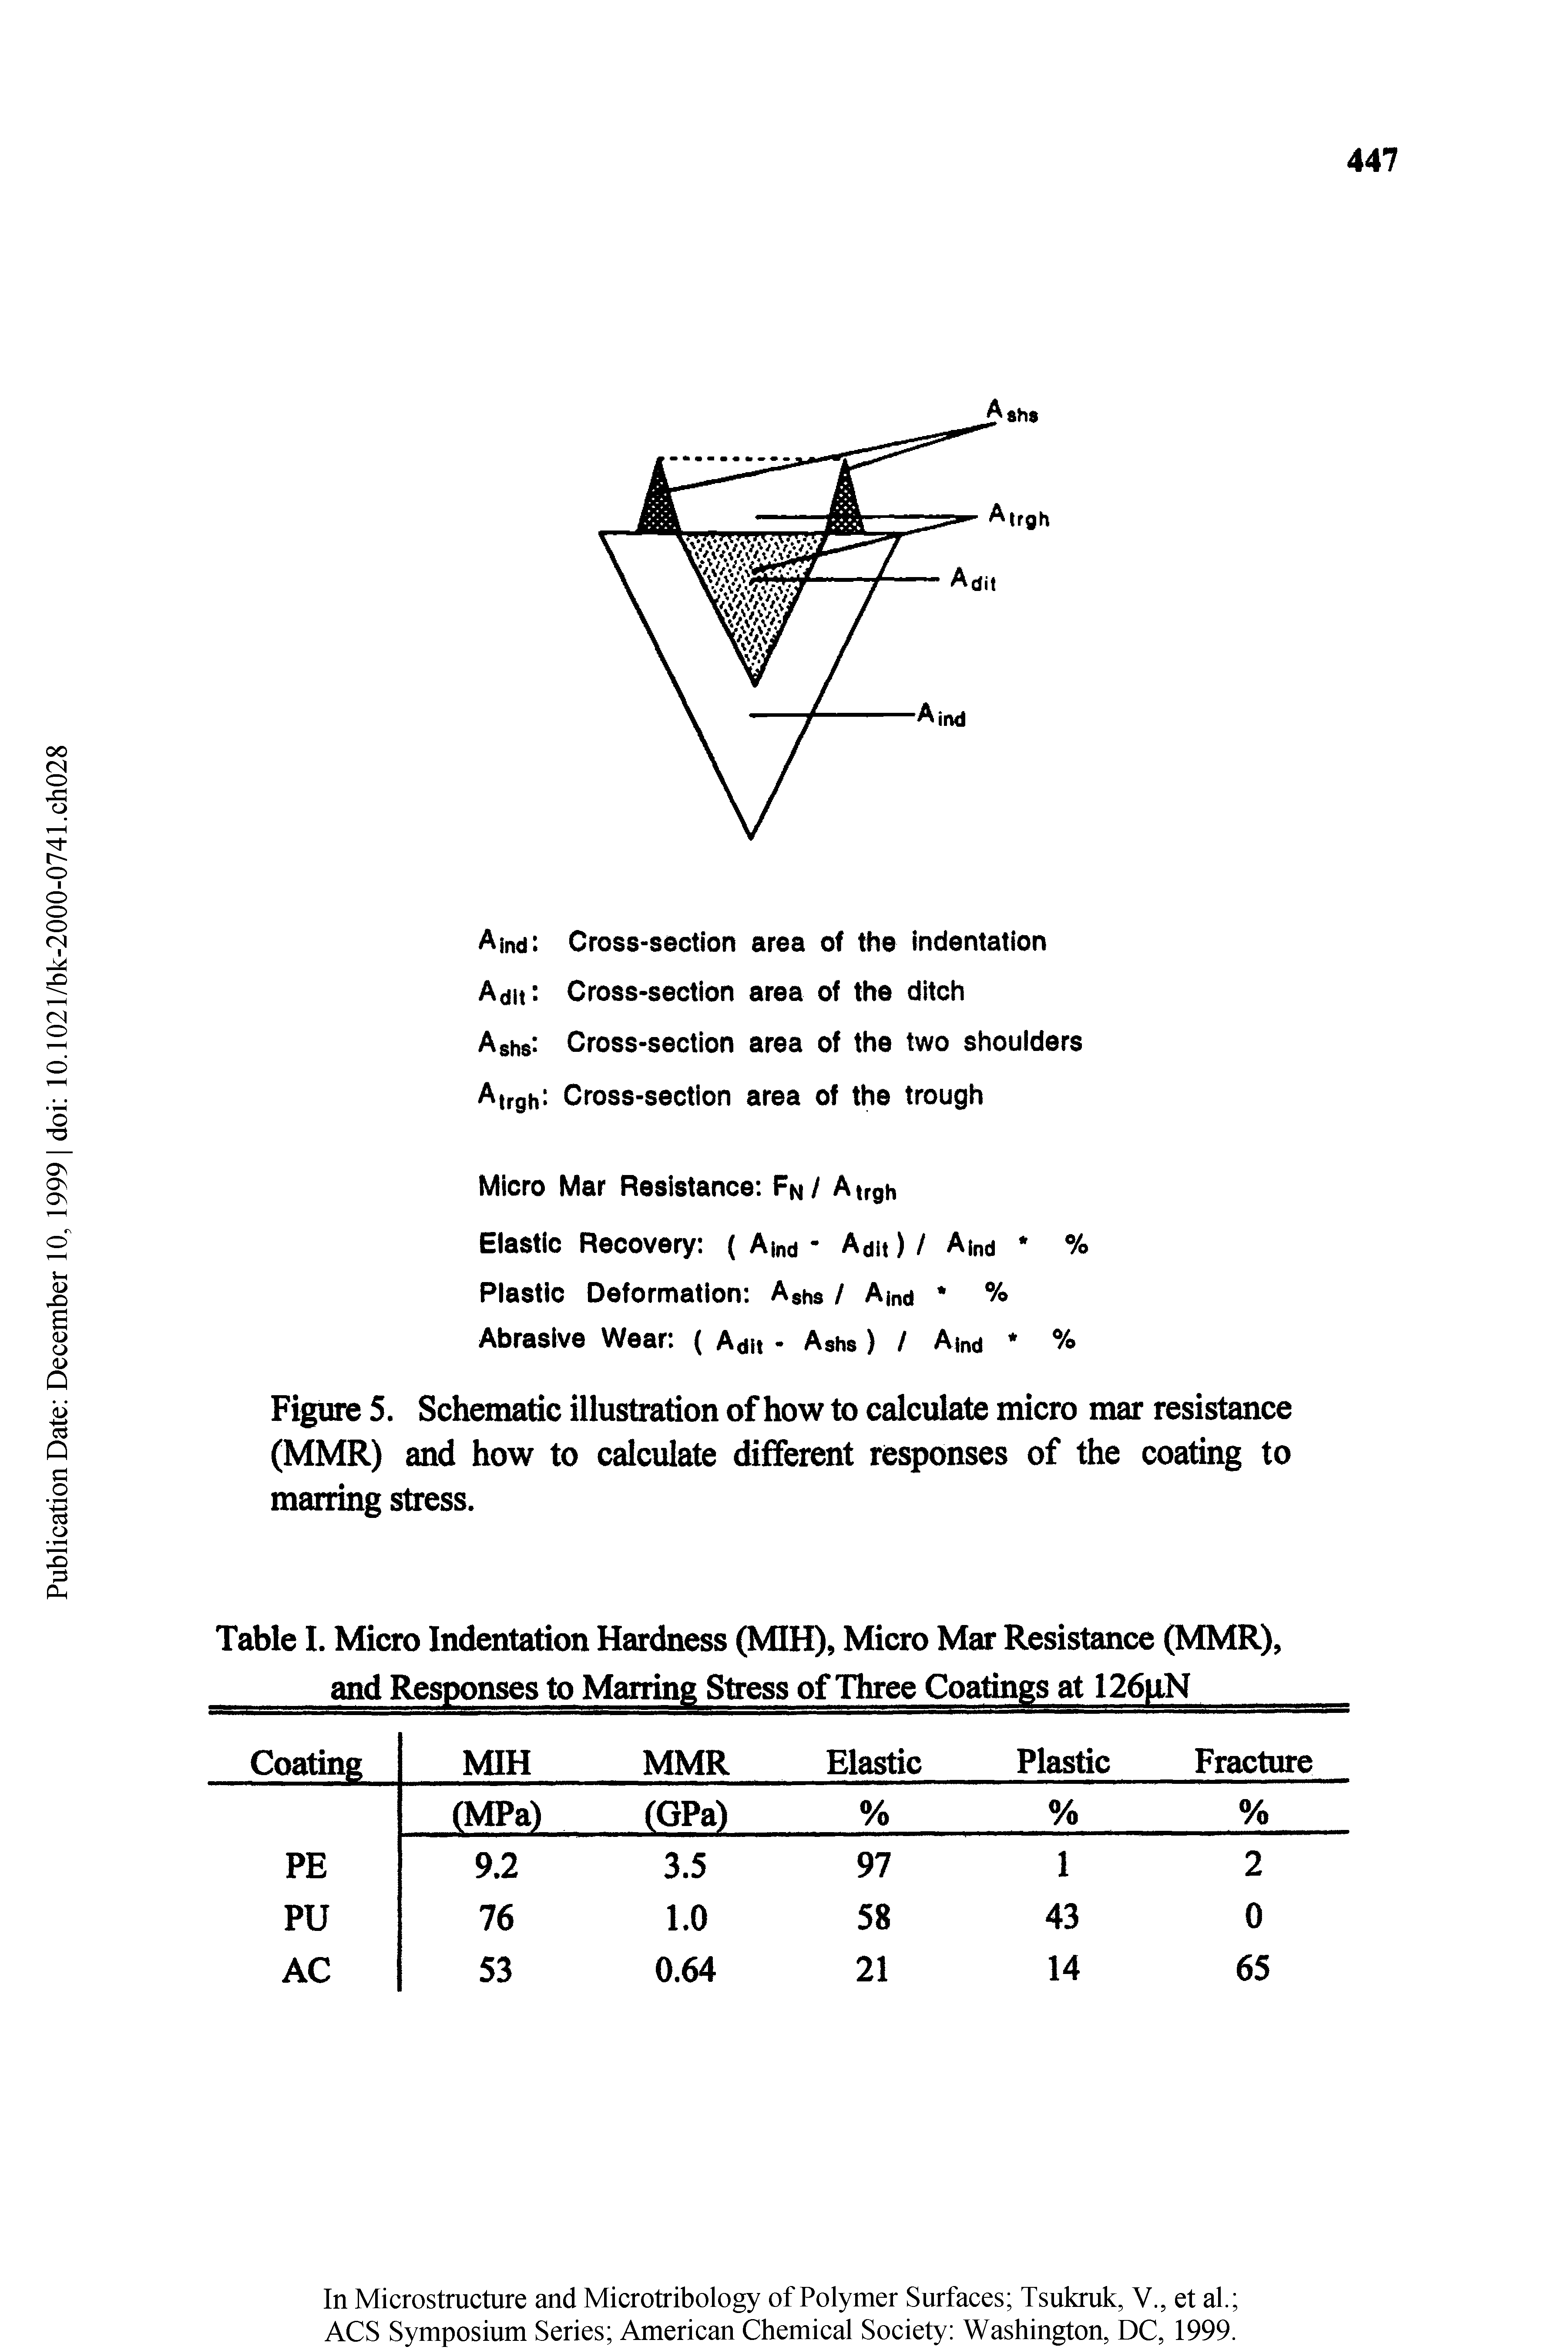 Figure 5. Schematic illustration of how to calculate micro mar resistance (MMR) and how to calculate different responses of the coating to marring stress.